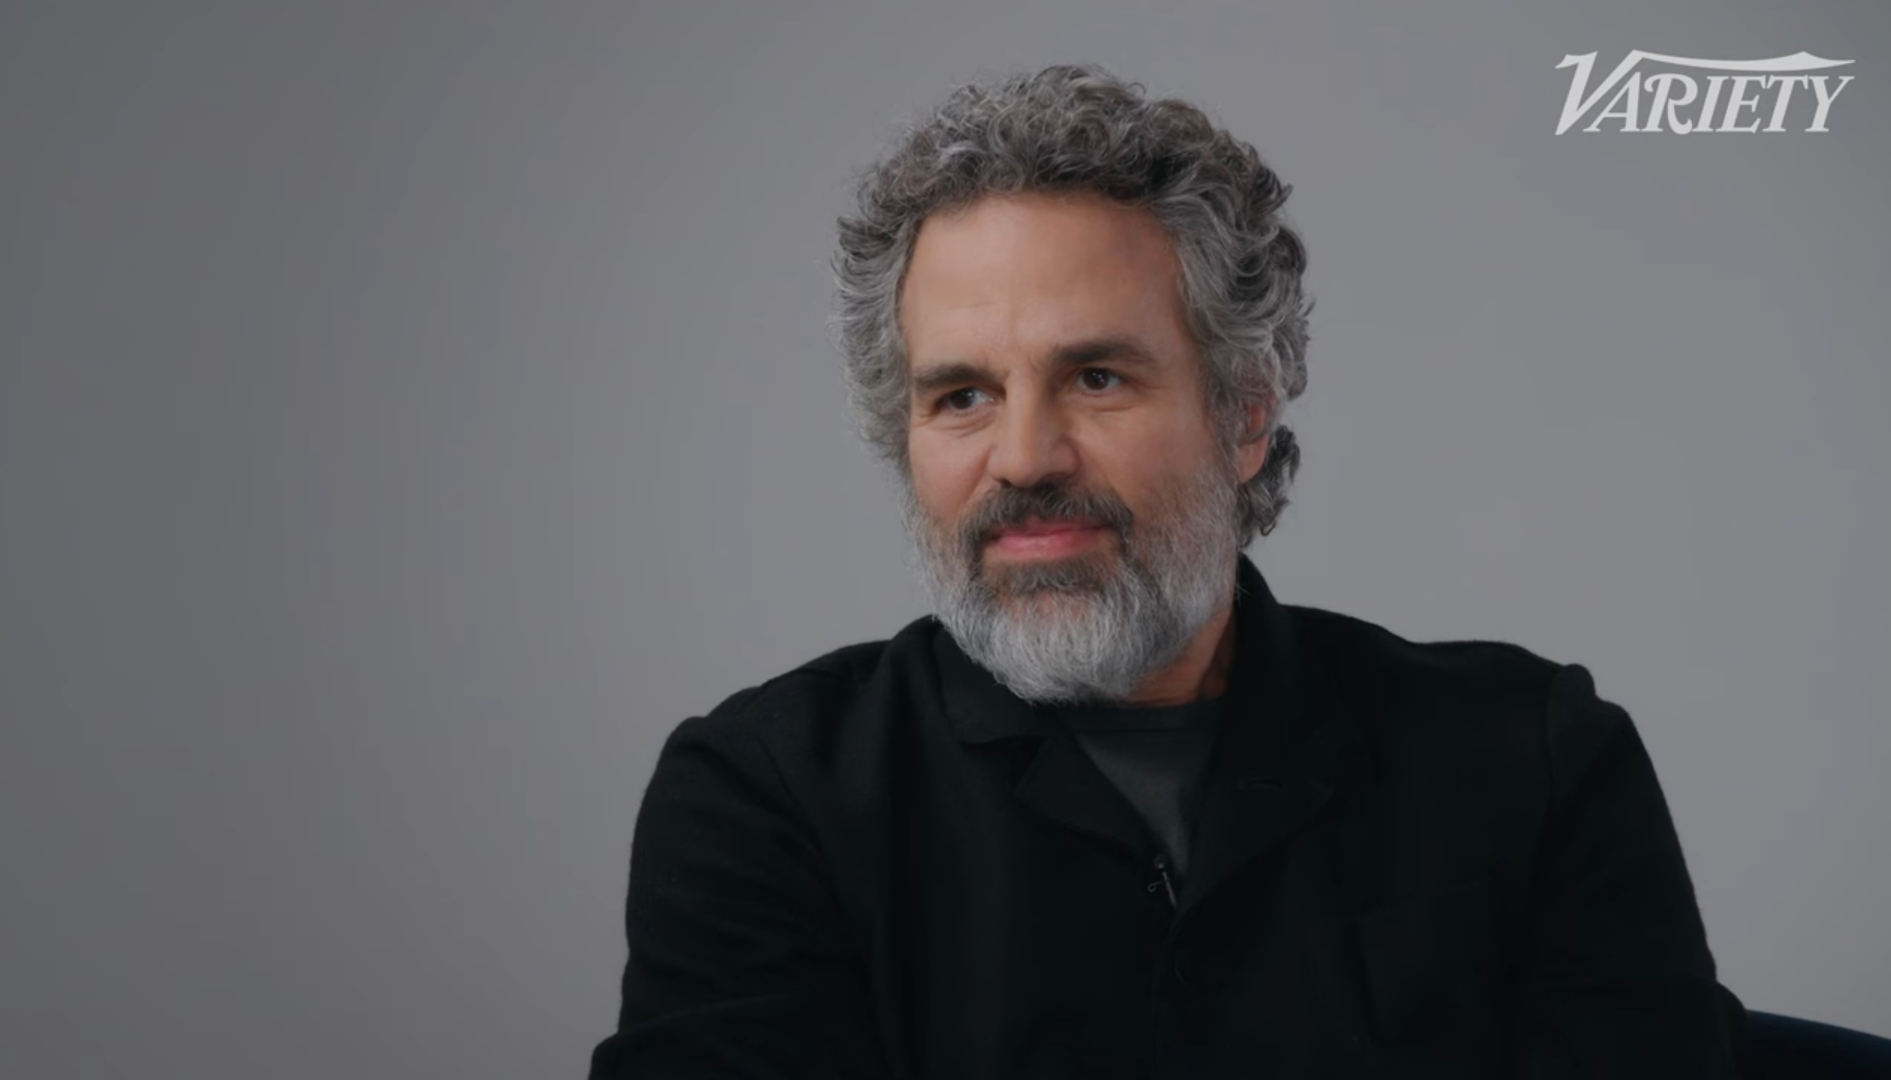 Mark Ruffalo during Variety's Actor on Actor interview. Source: Variety